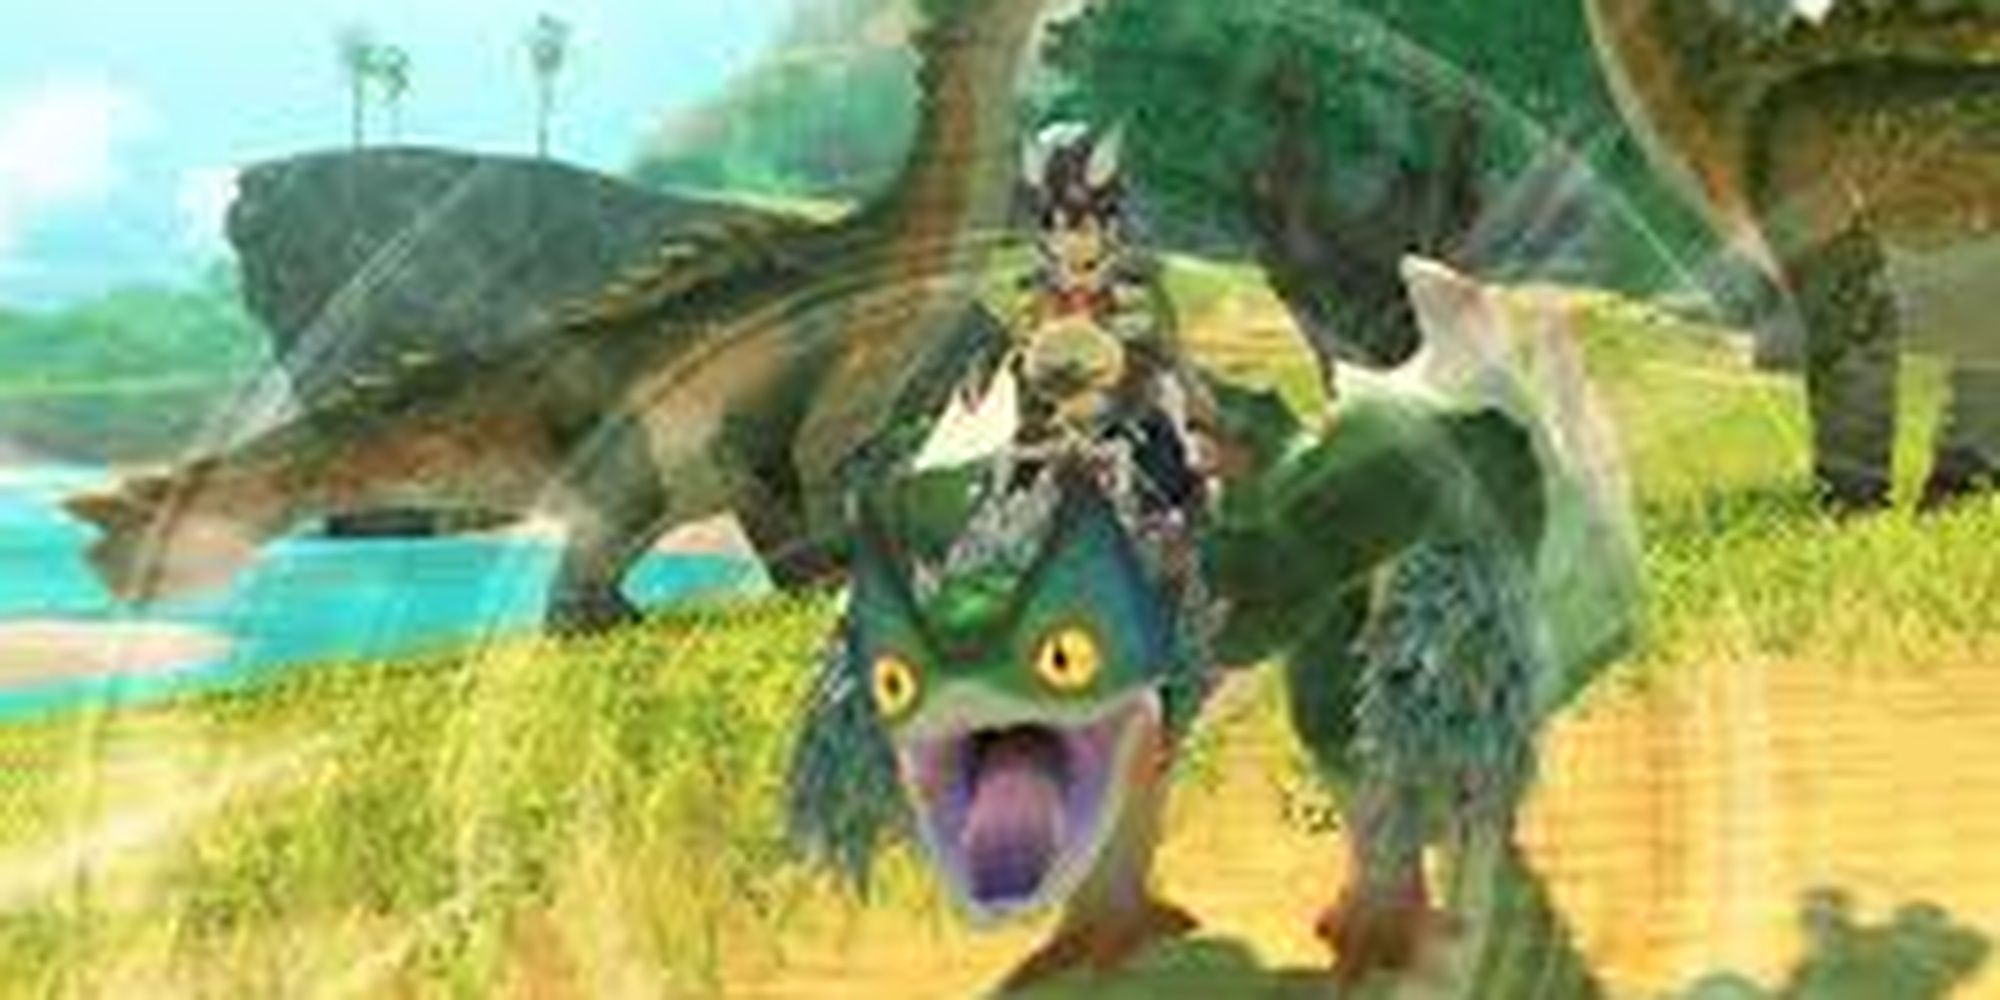 Player Character In Monster Hunter Stories 2 WIth Their Monstie Performing The Roar Riding Action To Intimidate Weaker Enemies